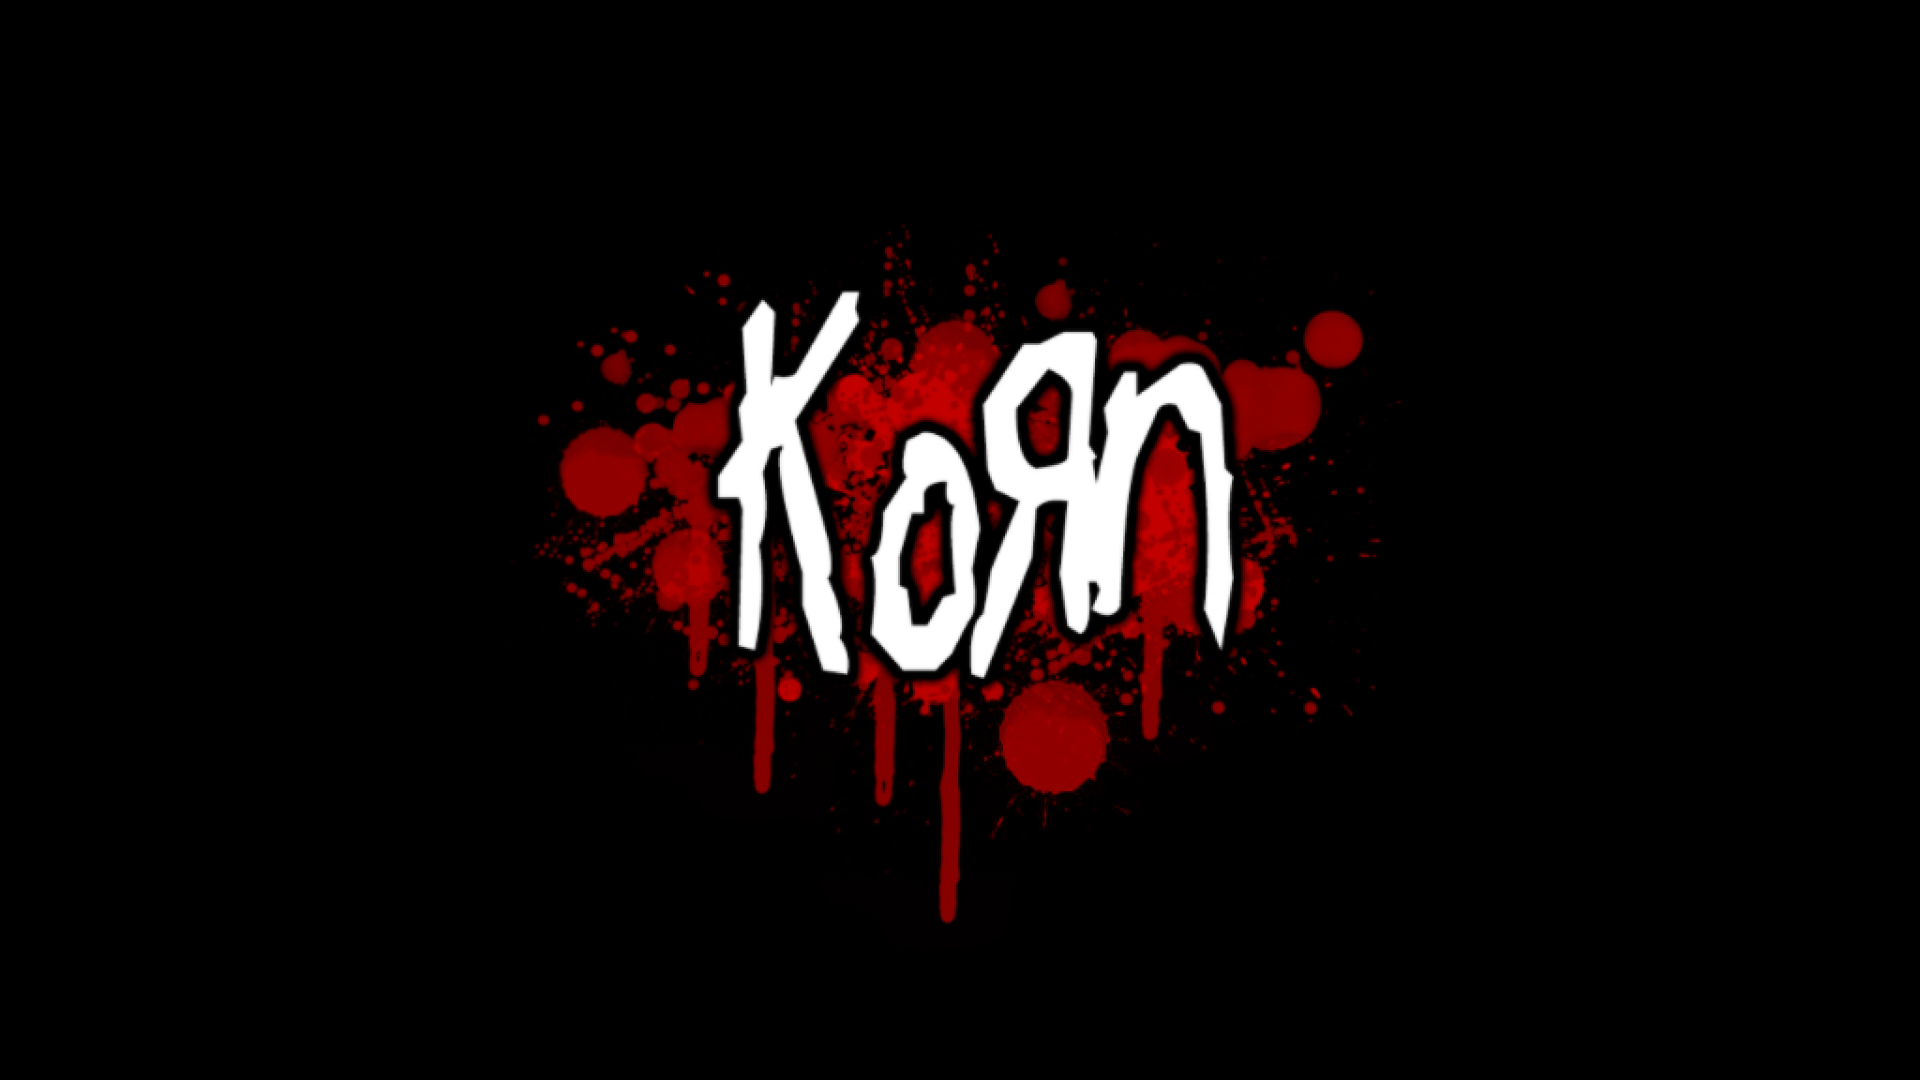 Korn wallpaper - - High Quality and Resolution